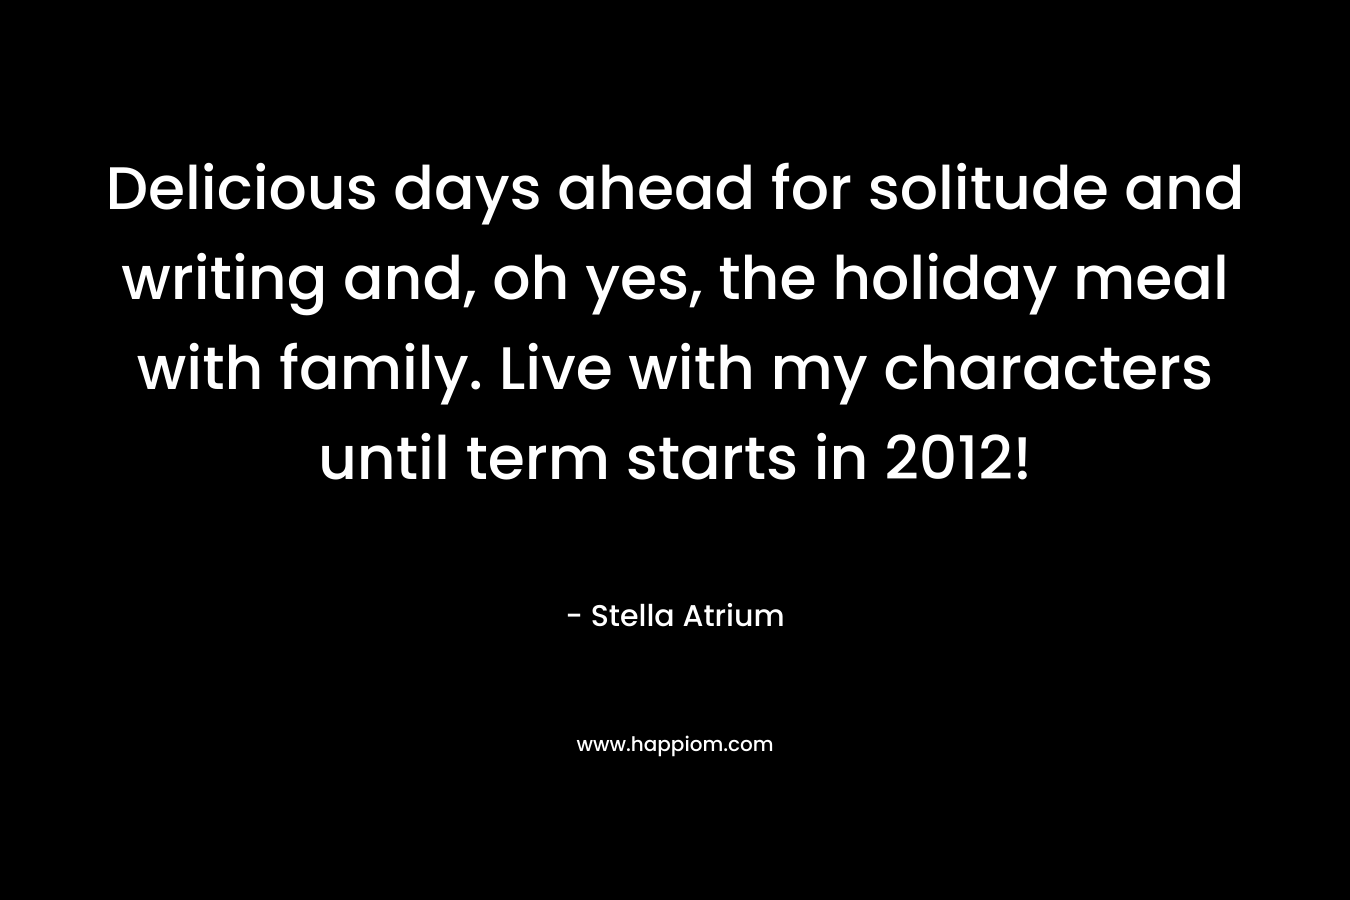 Delicious days ahead for solitude and writing and, oh yes, the holiday meal with family. Live with my characters until term starts in 2012! – Stella Atrium